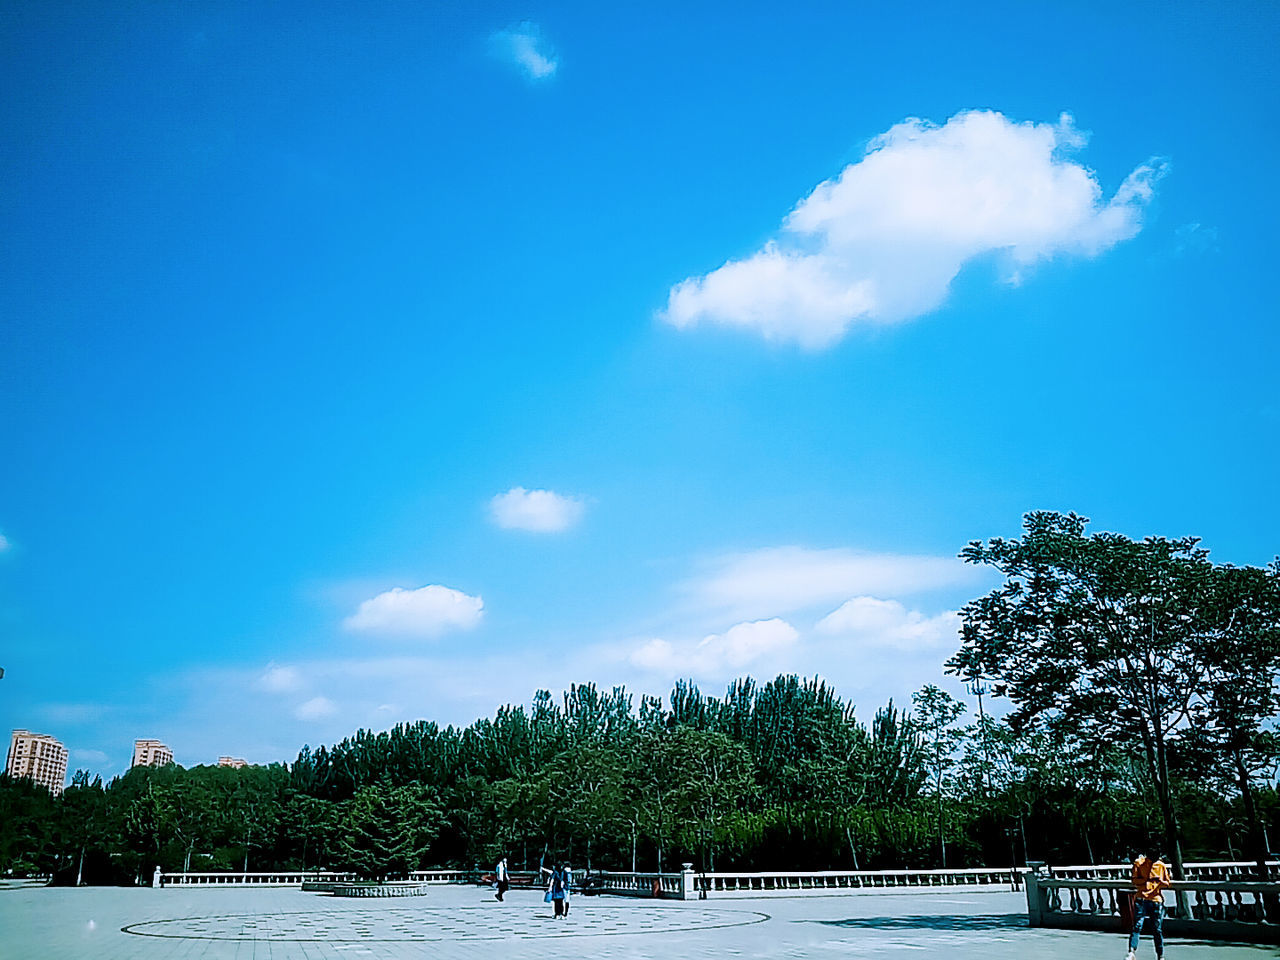 tree, cloud - sky, sky, blue, day, outdoors, water, nature, beauty in nature, swimming pool, architecture, no people